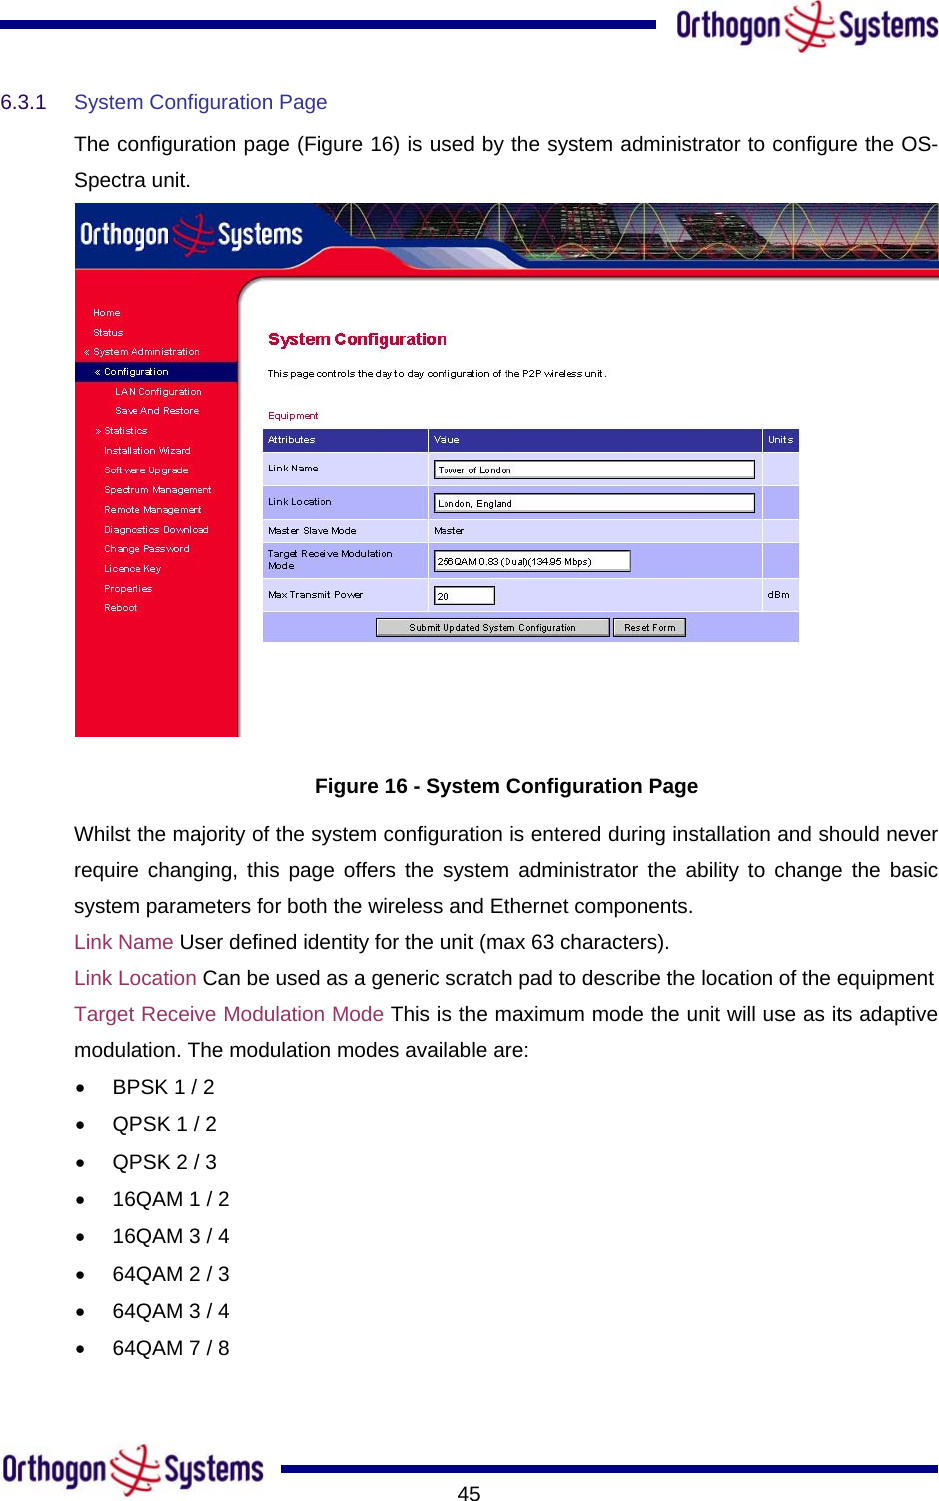       456.3.1  System Configuration Page  The configuration page (Figure 16) is used by the system administrator to configure the OS-Spectra unit.  Figure 16 - System Configuration Page Whilst the majority of the system configuration is entered during installation and should never require changing, this page offers the system administrator the ability to change the basic system parameters for both the wireless and Ethernet components.  Link Name User defined identity for the unit (max 63 characters).  Link Location Can be used as a generic scratch pad to describe the location of the equipment  Target Receive Modulation Mode This is the maximum mode the unit will use as its adaptive modulation. The modulation modes available are: •  BPSK 1 / 2 •  QPSK 1 / 2 •  QPSK 2 / 3 •  16QAM 1 / 2 •  16QAM 3 / 4 •  64QAM 2 / 3 •  64QAM 3 / 4 •  64QAM 7 / 8 